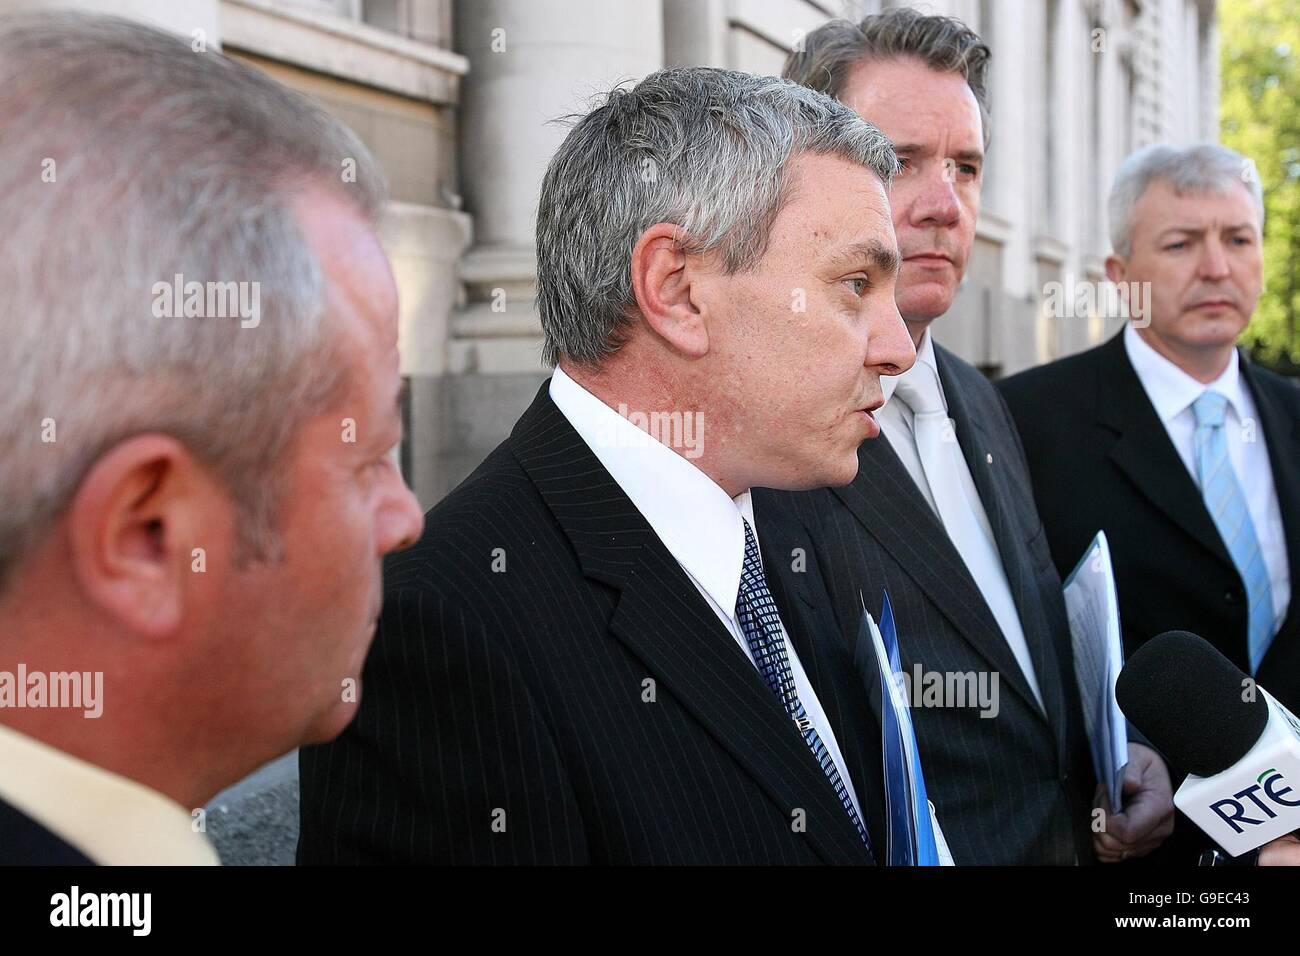 Members of the Ulster Political Research Group from left: William McQuiston, Davy Nichol, Frankie Gallagher and Colin Holiday outside Government Buildings where they met Taoiseach Bertie Ahern TD. Stock Photo